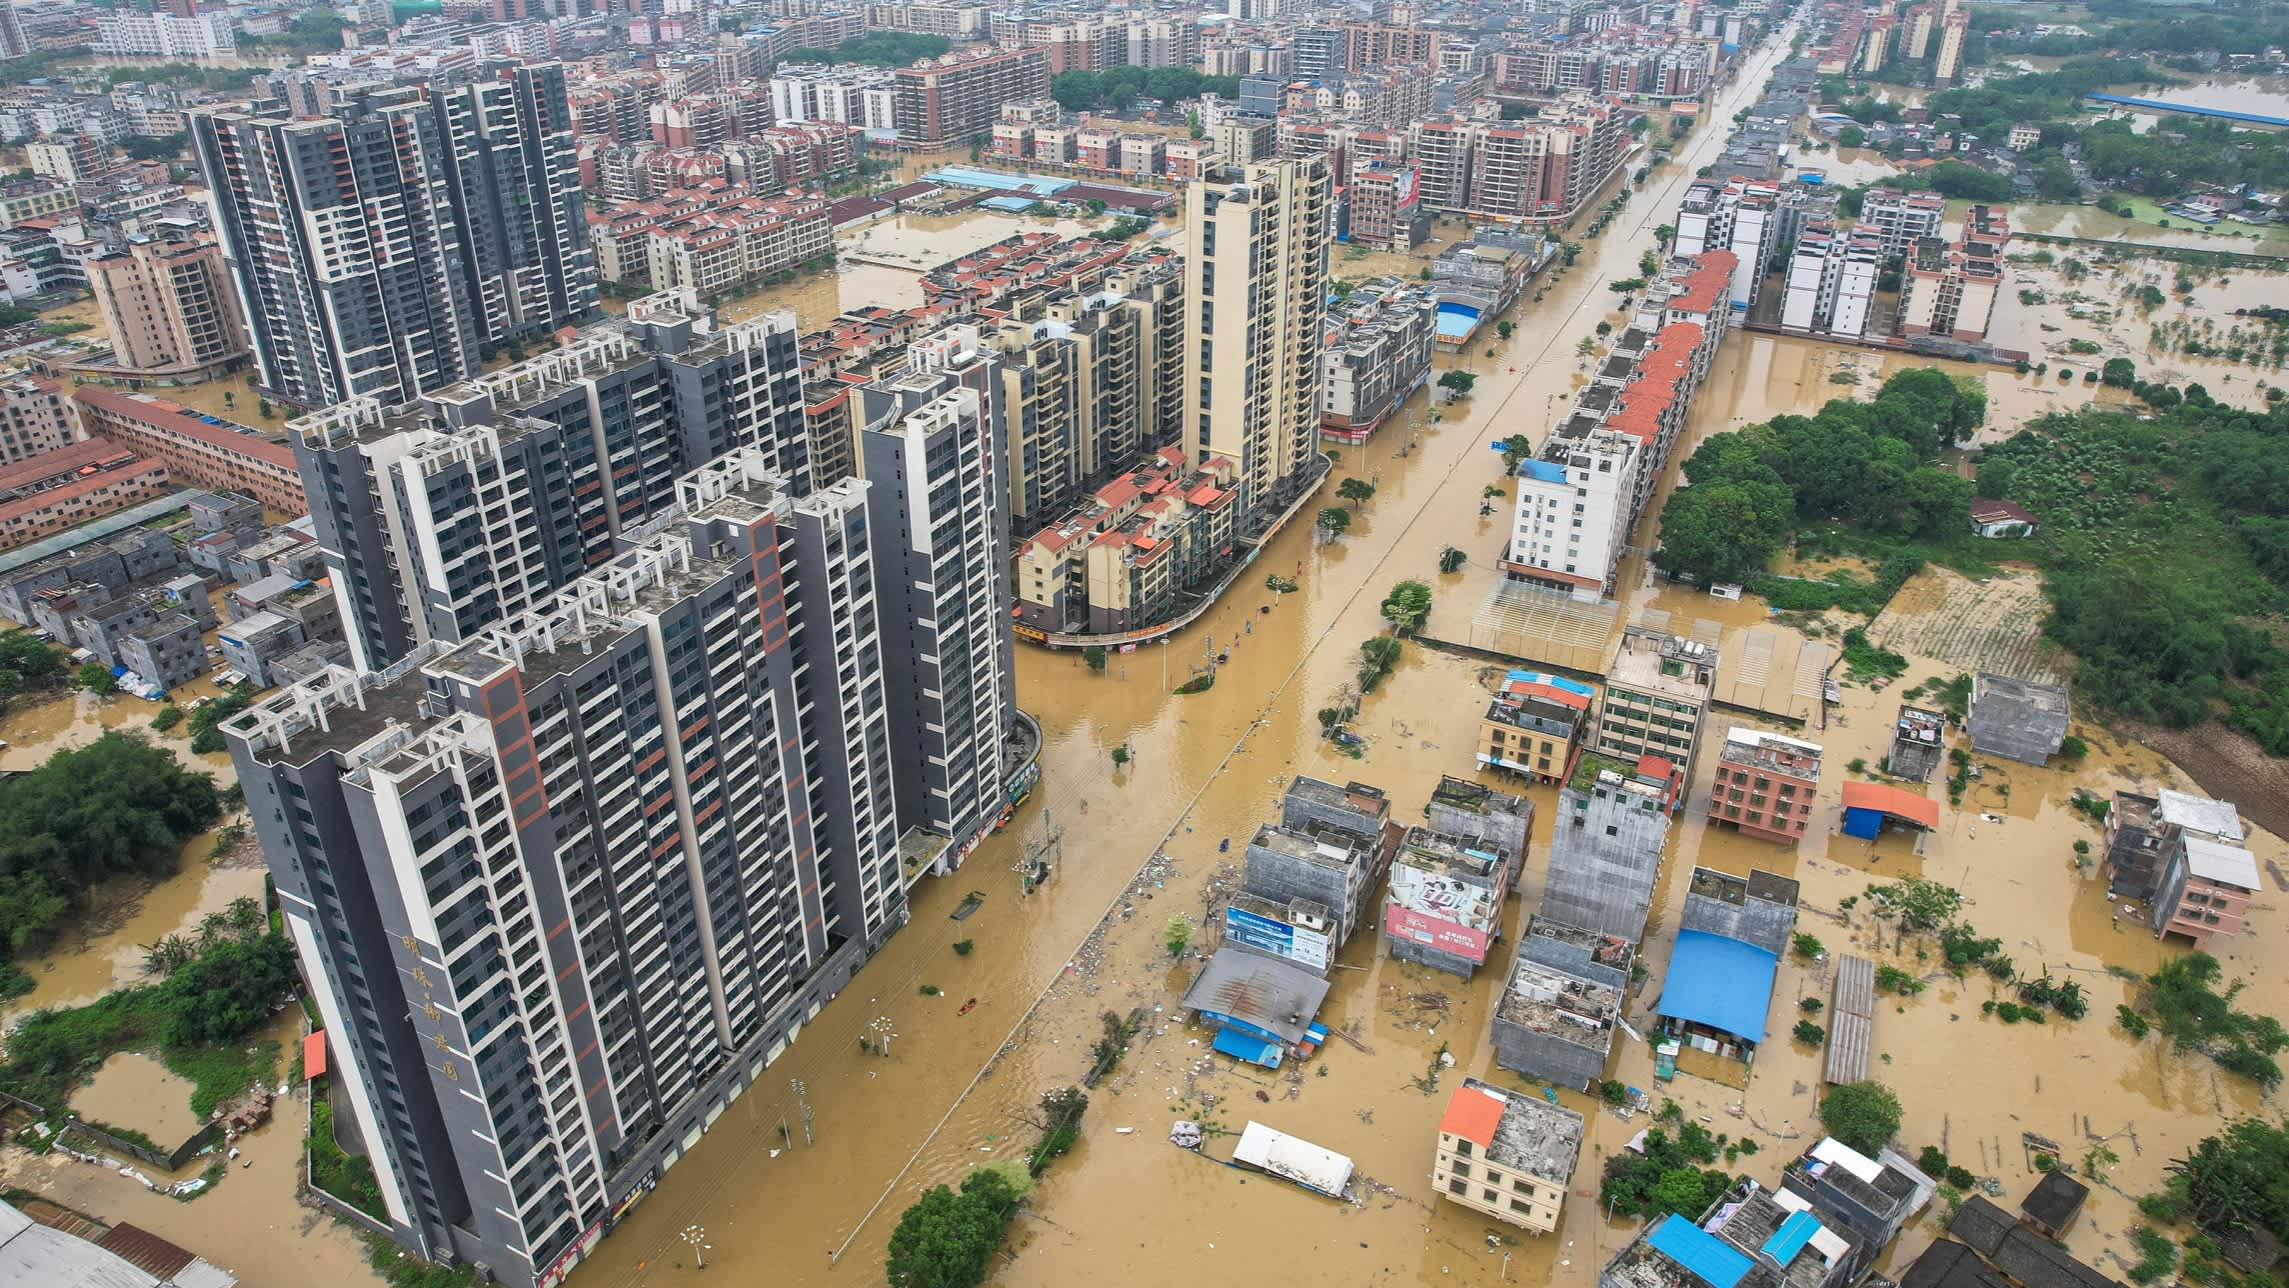 Flooded buildings and streets after heavy rains in Qingyuan city